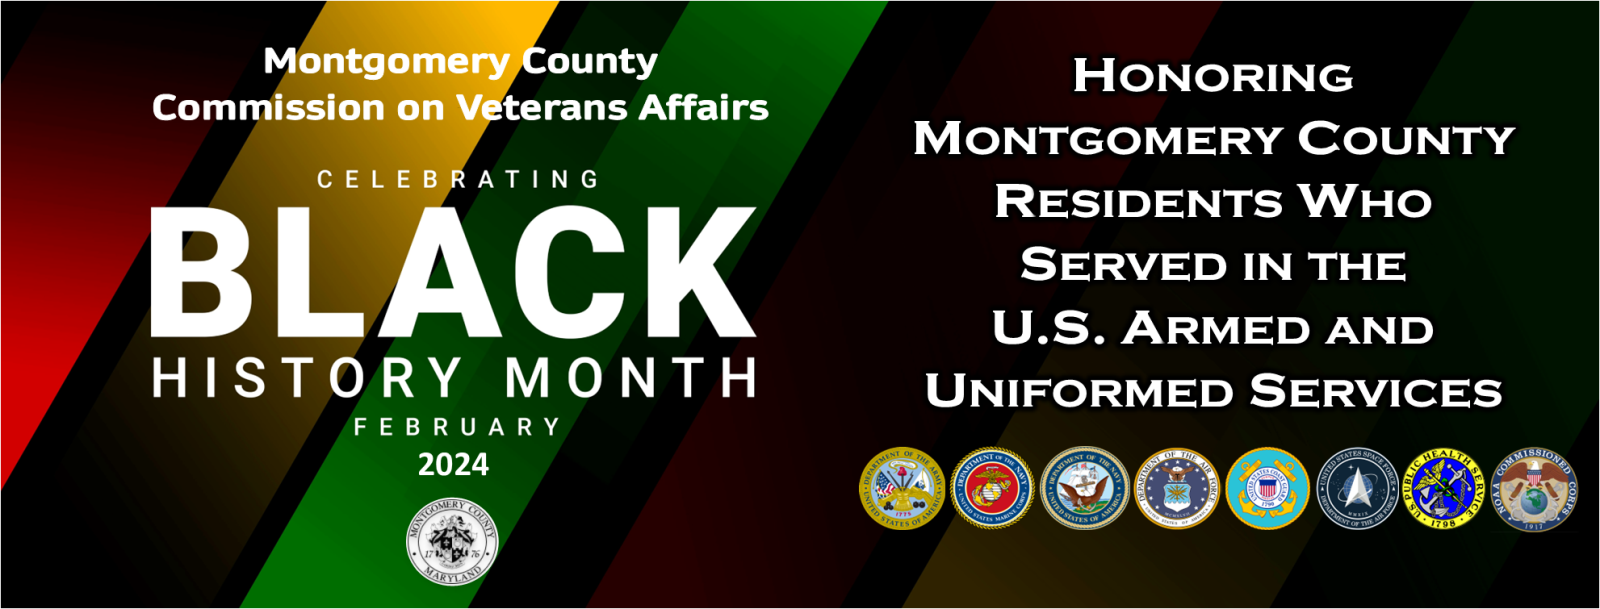 Montgomery County Updates Black Veterans to be Honored in Tributes by